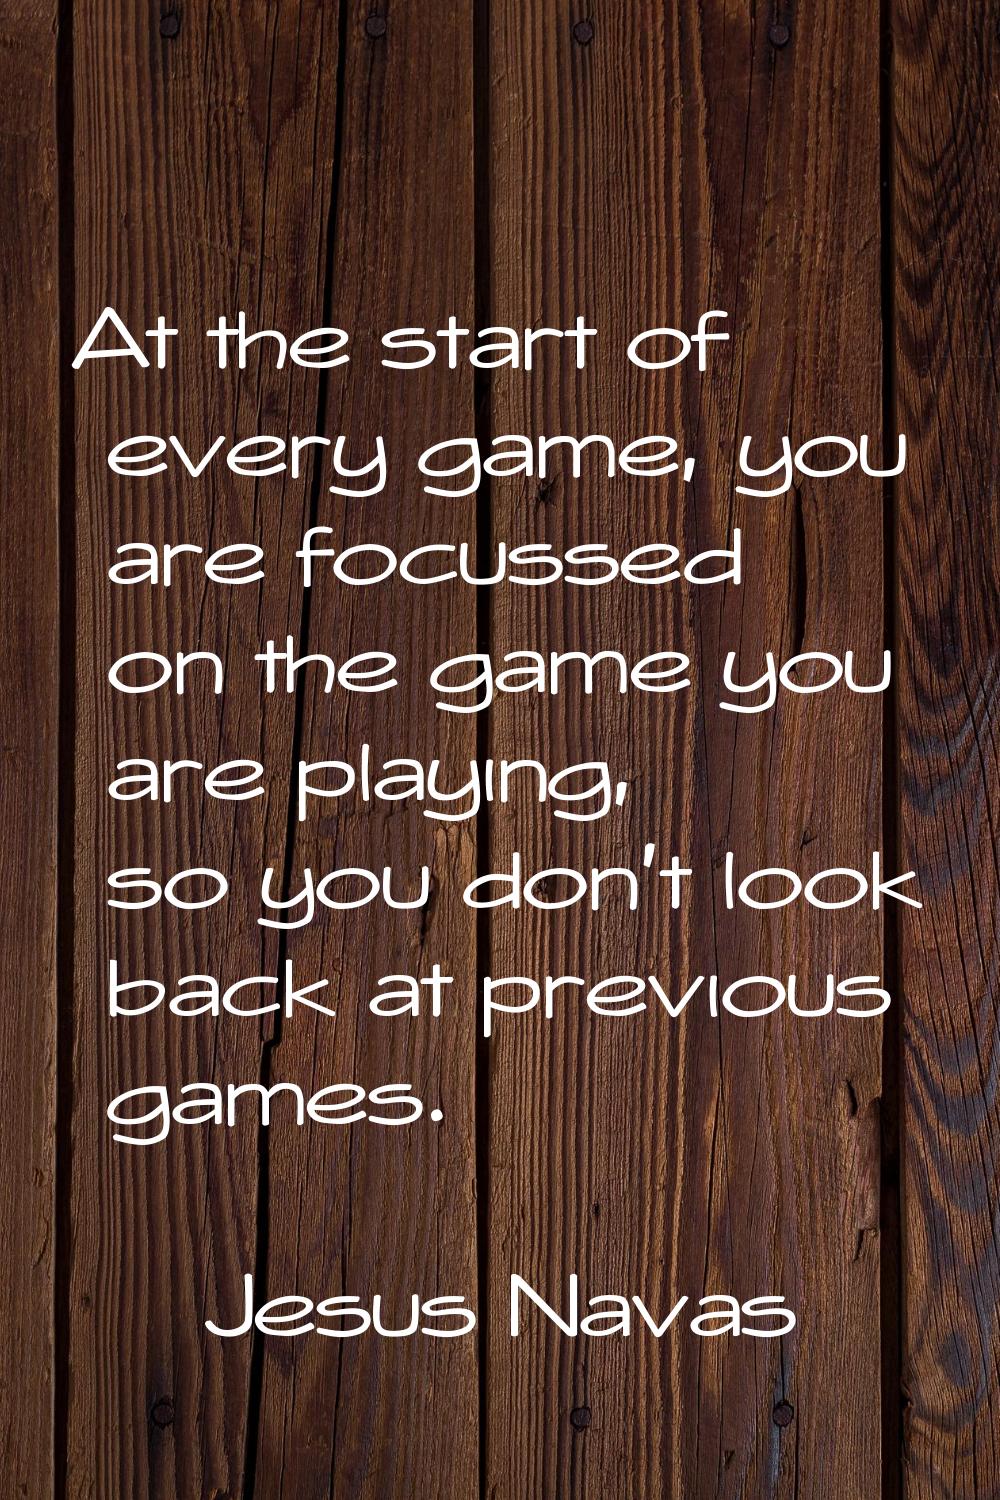 At the start of every game, you are focussed on the game you are playing, so you don't look back at